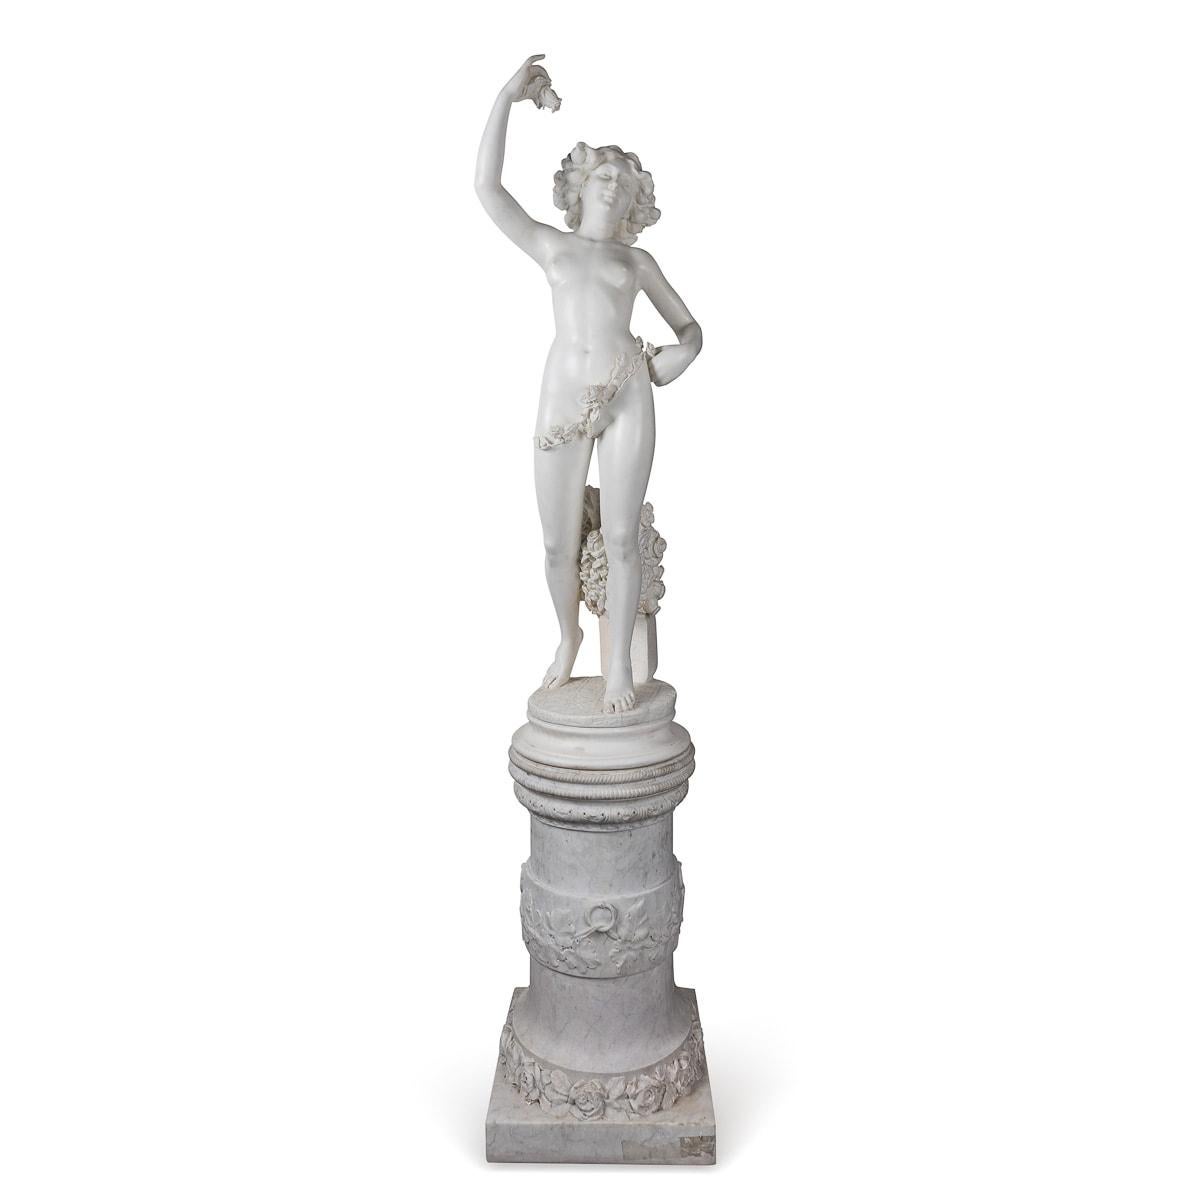 Crafted in the mid-19th century, this antique Italian marble sculpture portrays a graceful nude lady draped with flowers. Delicately holds up a small flower in one hand, while the other hand rests on her hip, below her feet a cornucopia of flowers,